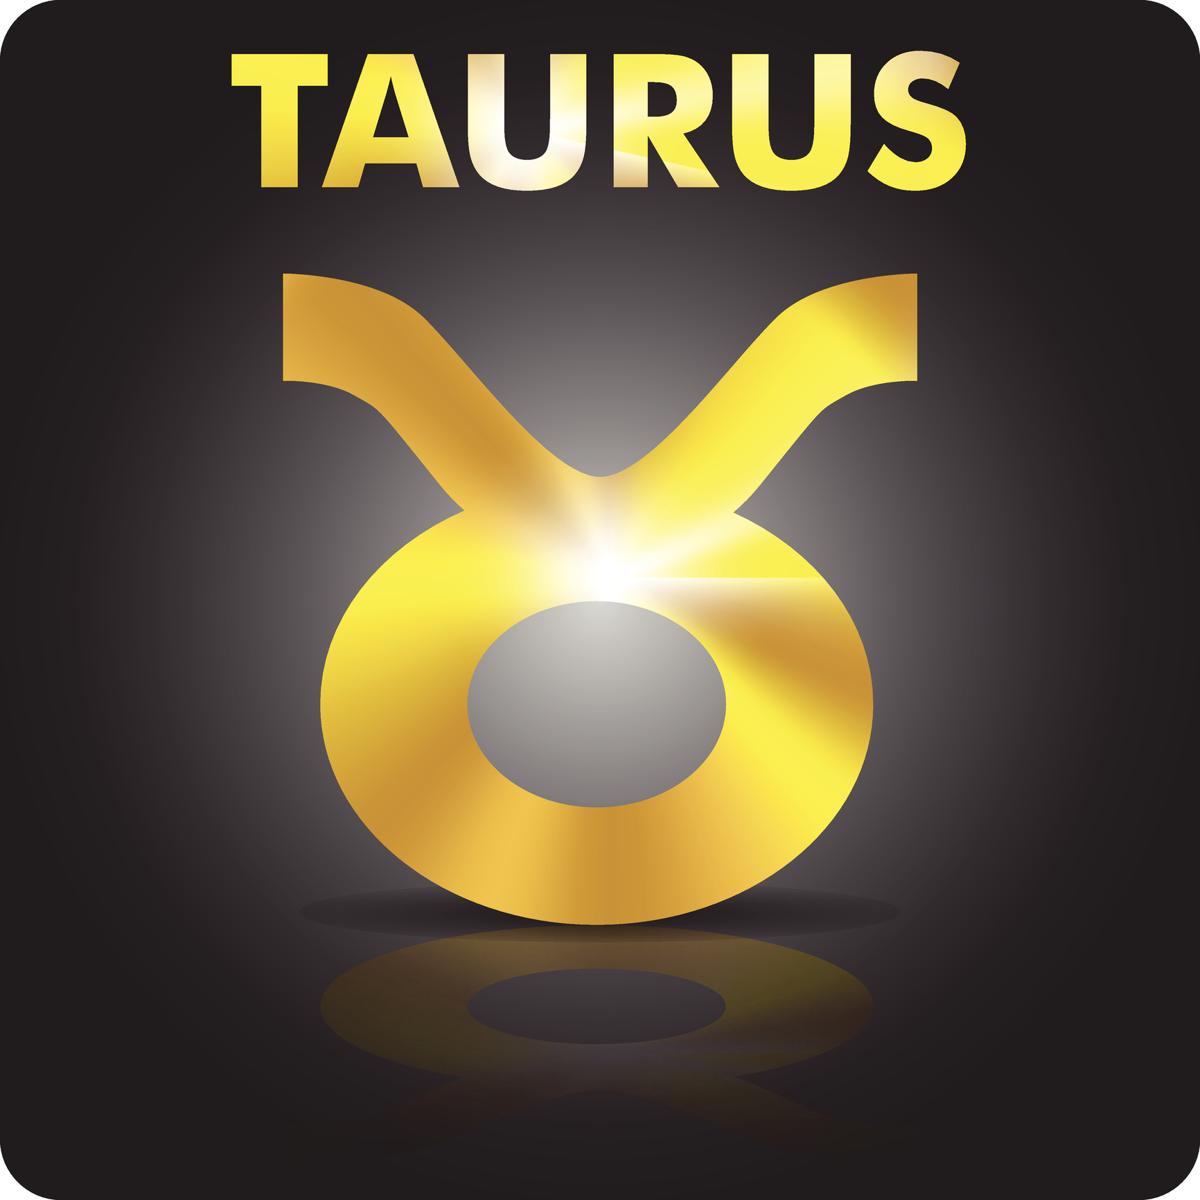 You loves he tells man you taurus How Does